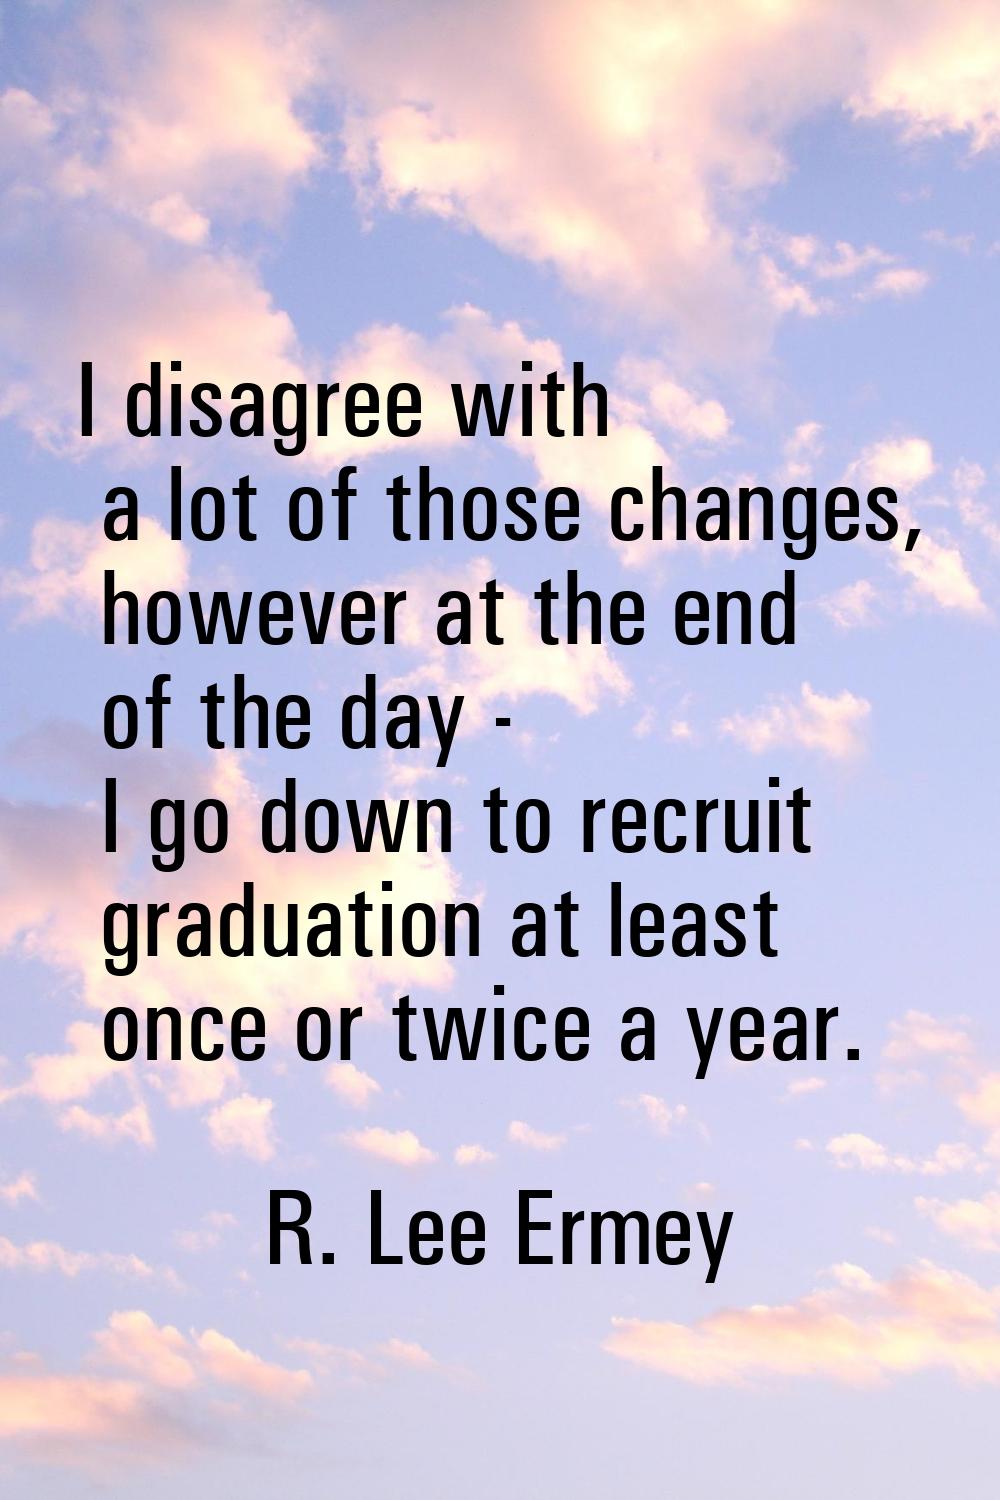 I disagree with a lot of those changes, however at the end of the day - I go down to recruit gradua